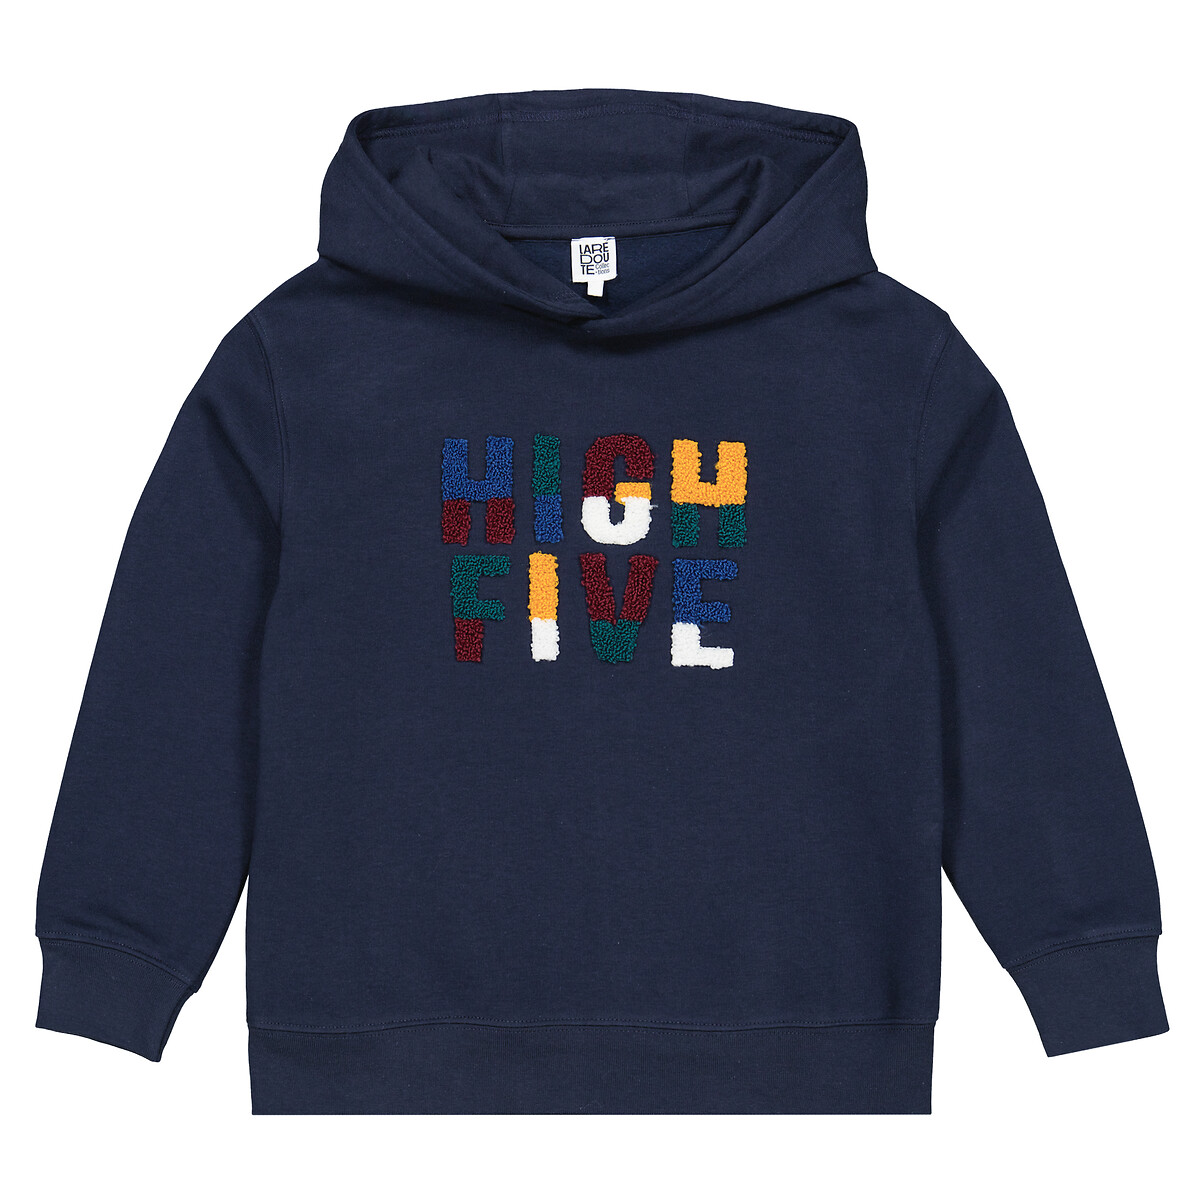 Les Signatures - Embroidered Slogan Hoodie in Cotton Mix